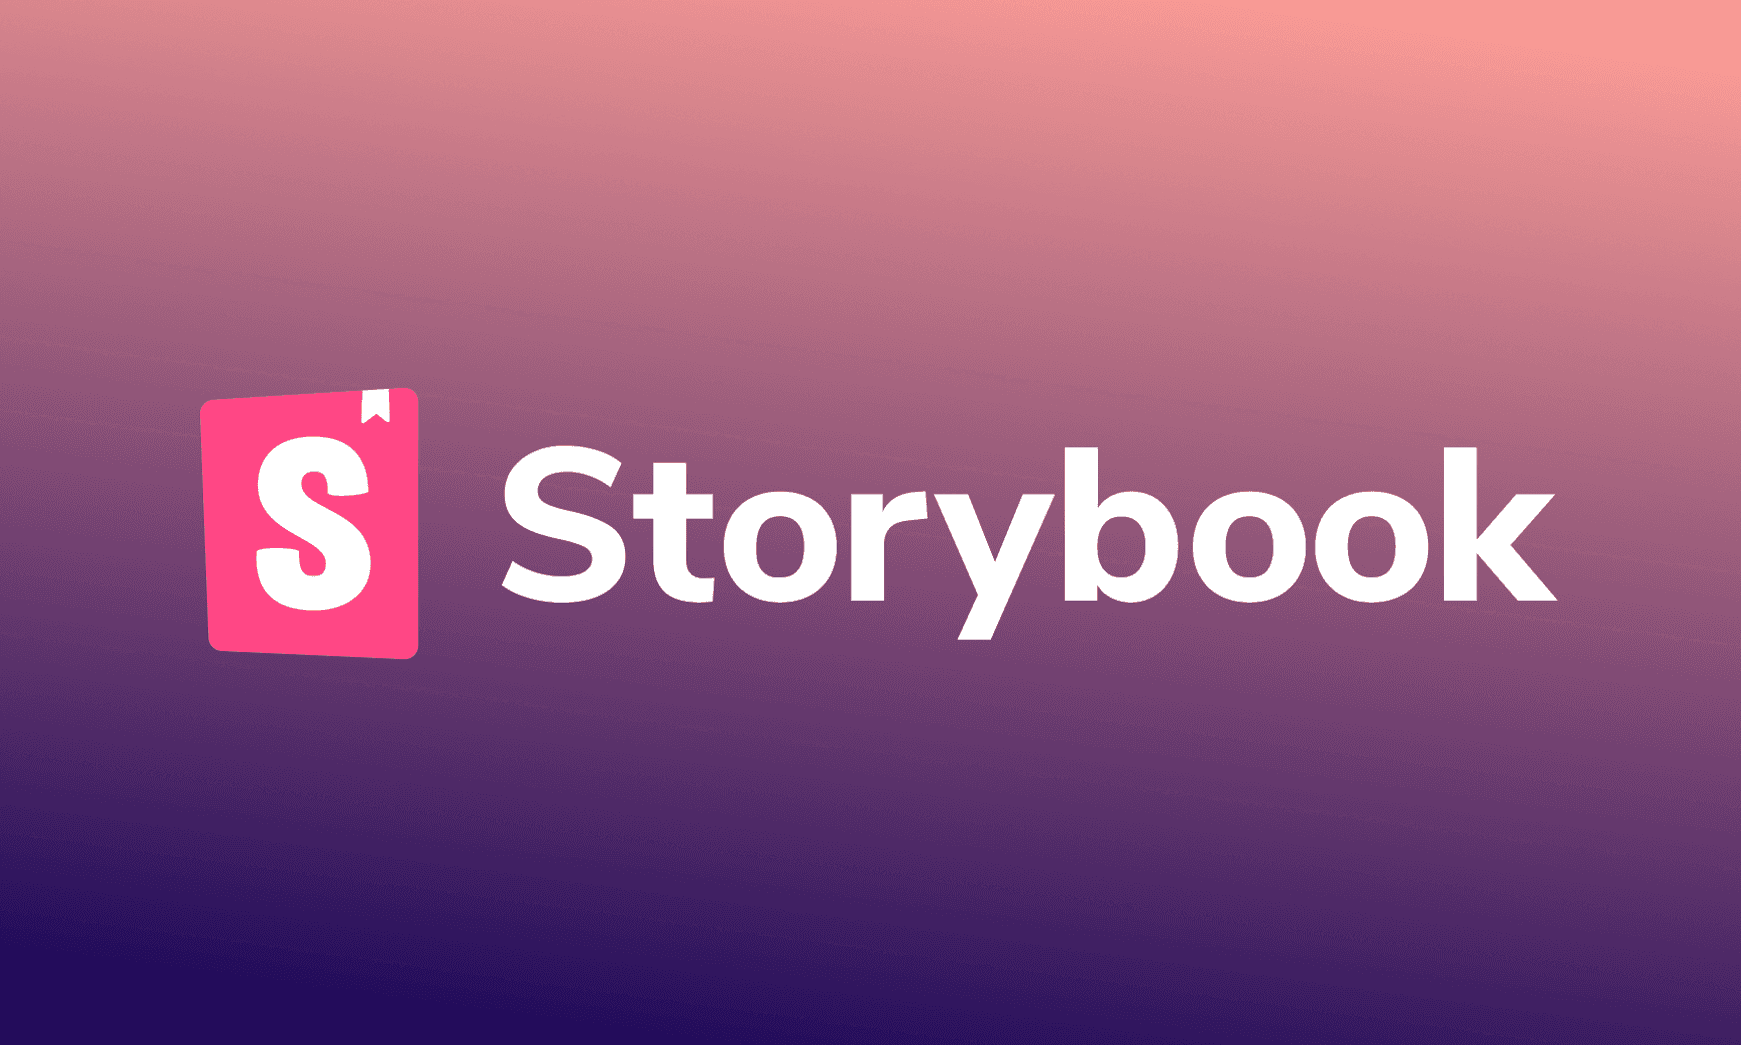 How I converted our UI library from react-docgen to Storybook